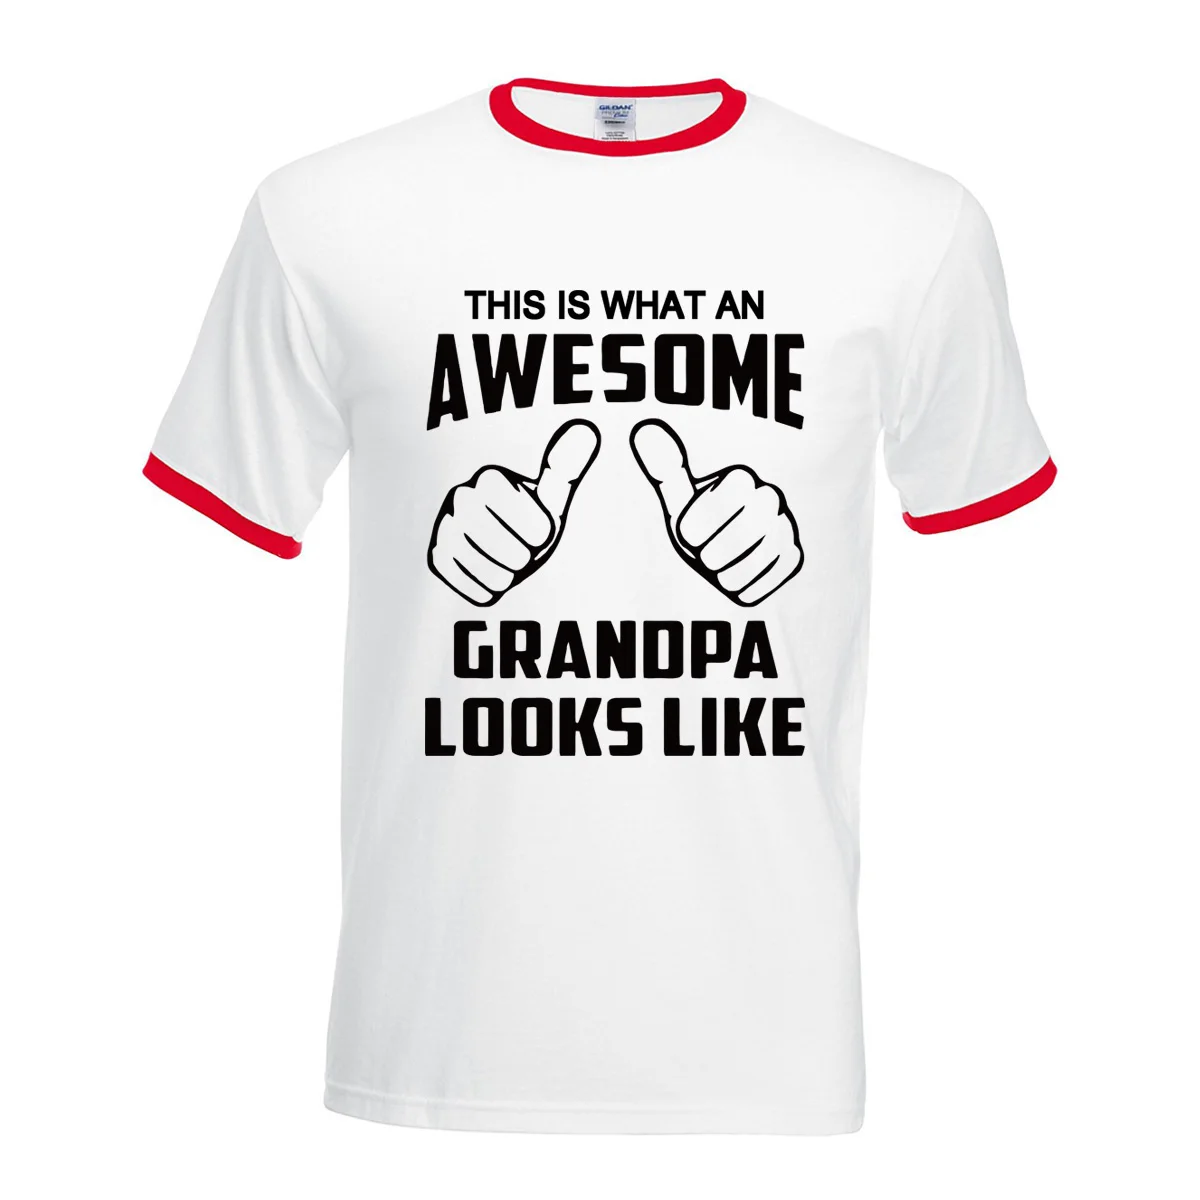 Image men short sleeve hit contrast collar camisetas 2017 This Is What An Awesome Grandpa Looks Like t shirt summer brand clothing mma